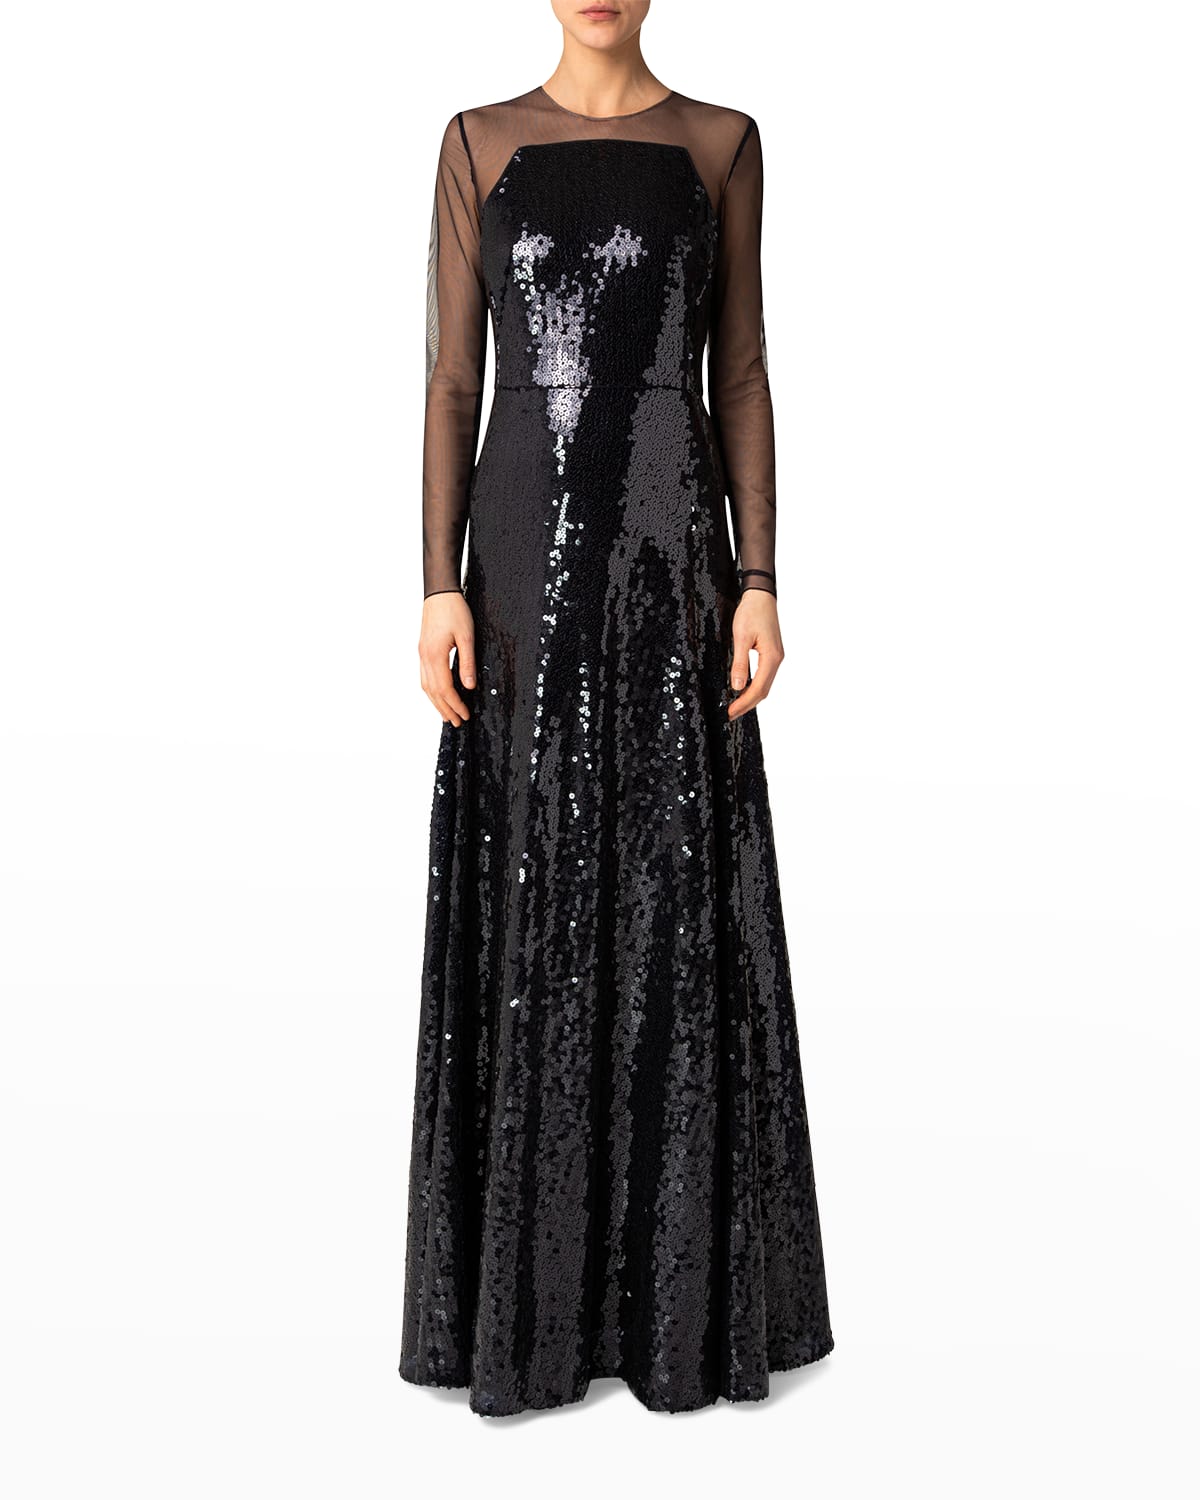 AKRIS SEQUIN LONG-SLEEVE ILLUSION GOWN